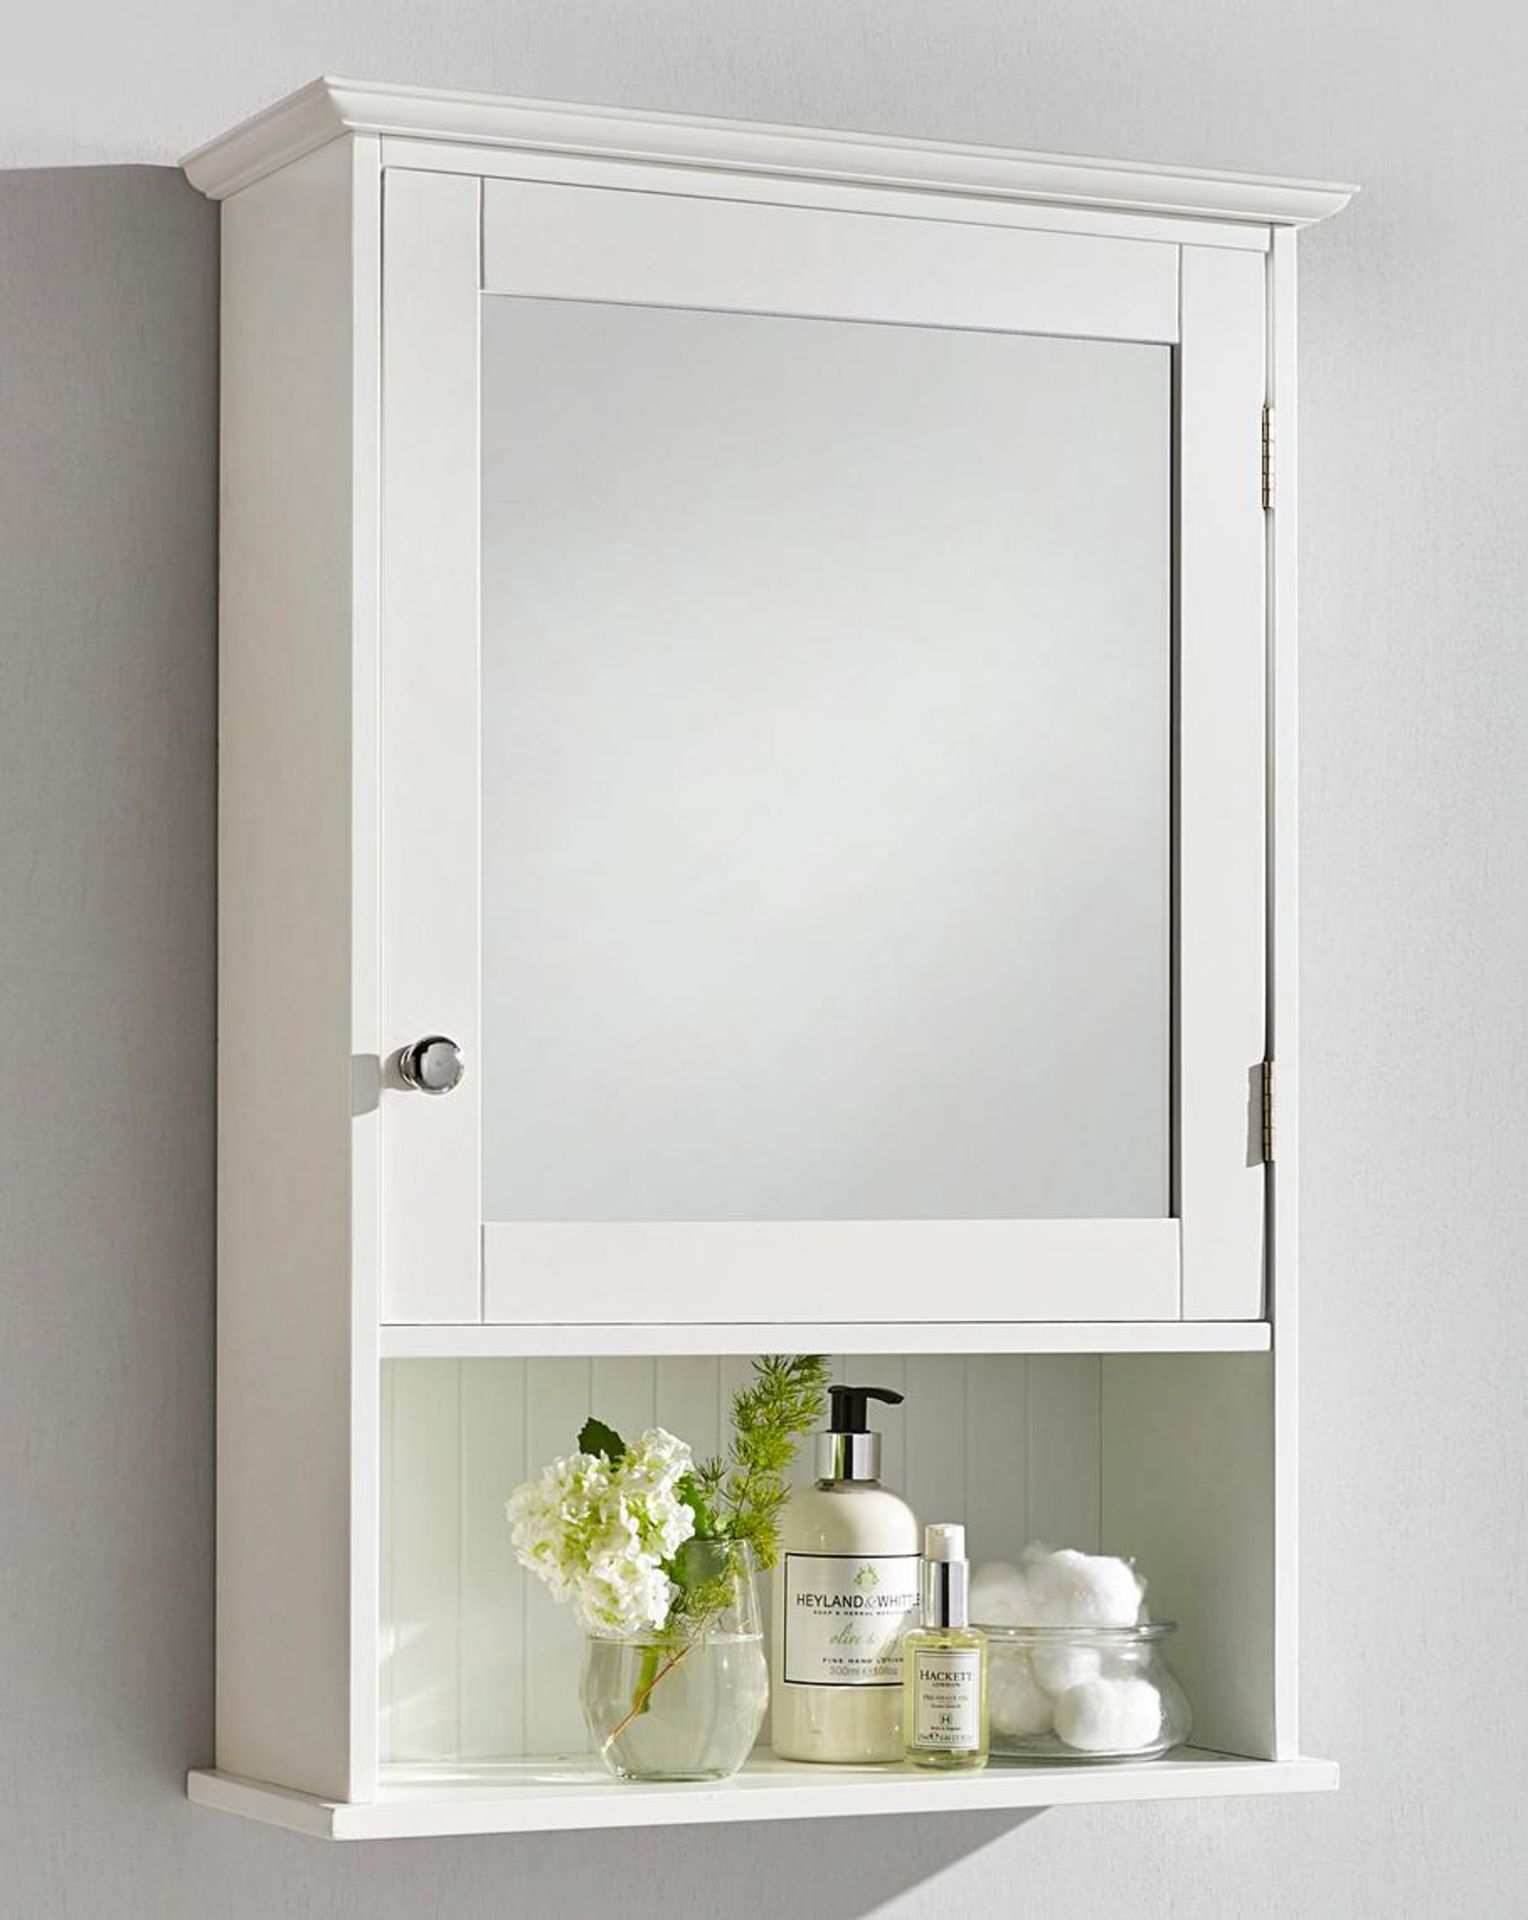 New England Mirror Cabinet. - SR4. Clean, pretty and boasting a gorgeous country style, this